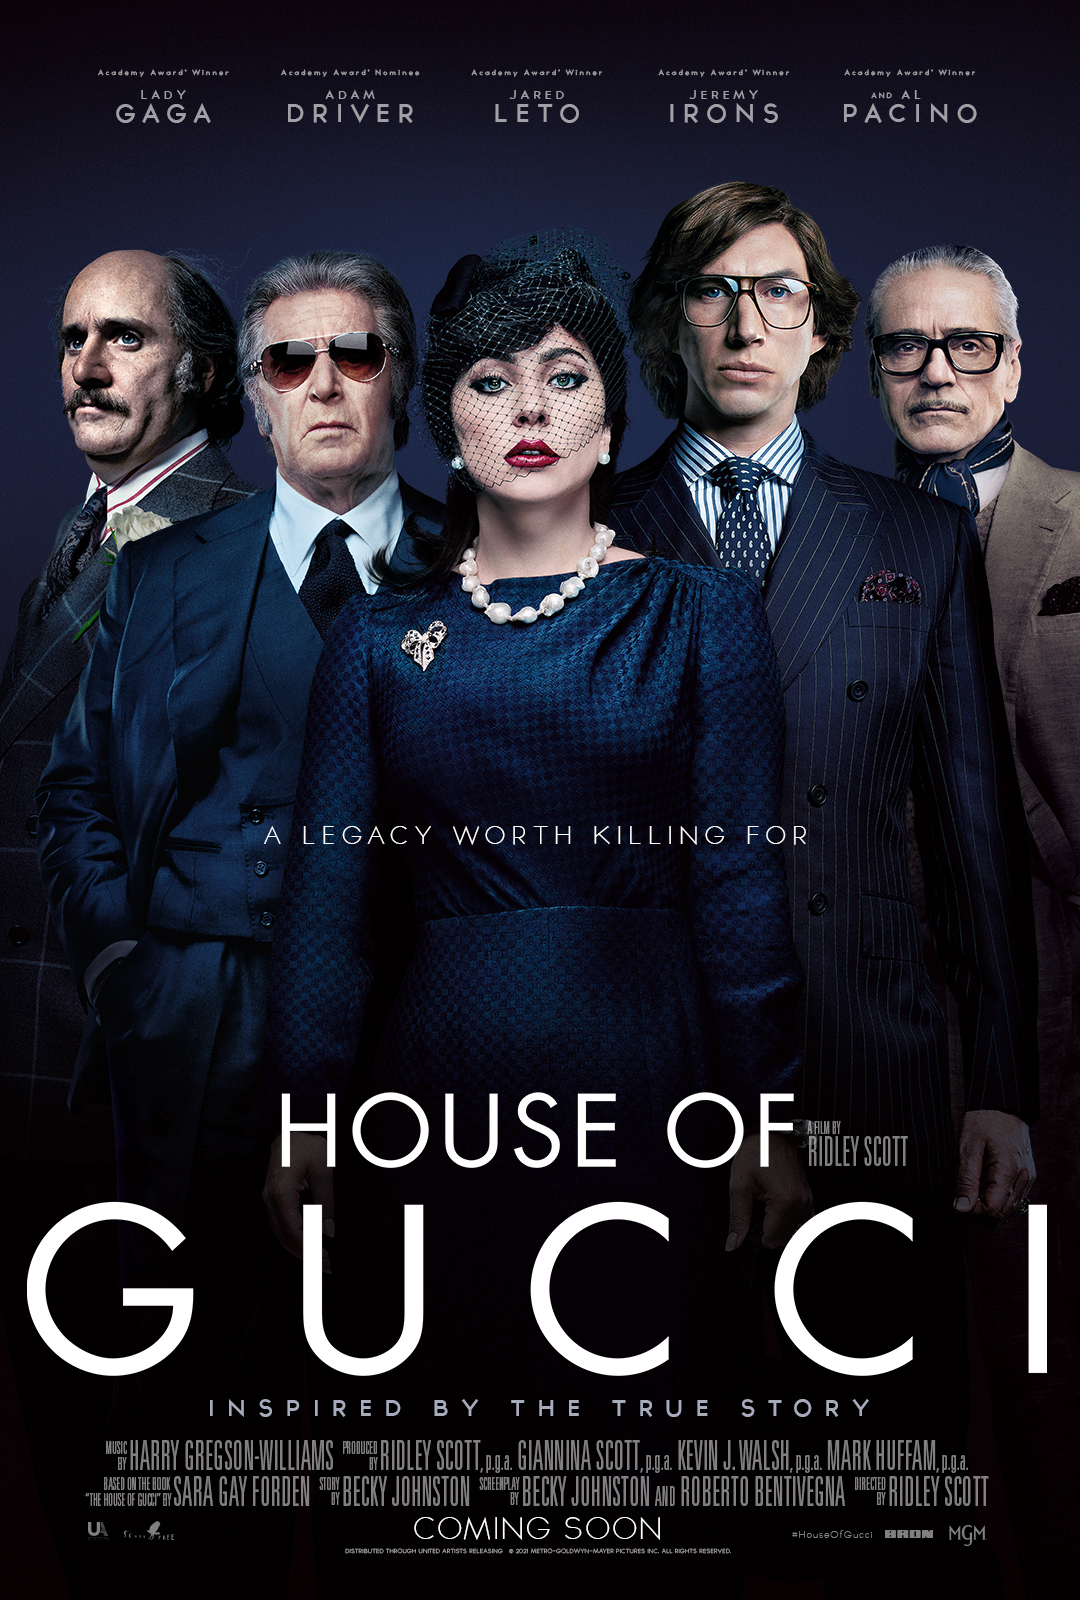 The cover for the House of Guccie movie, with Lady Gaga prominently featured in the center in front of some men.